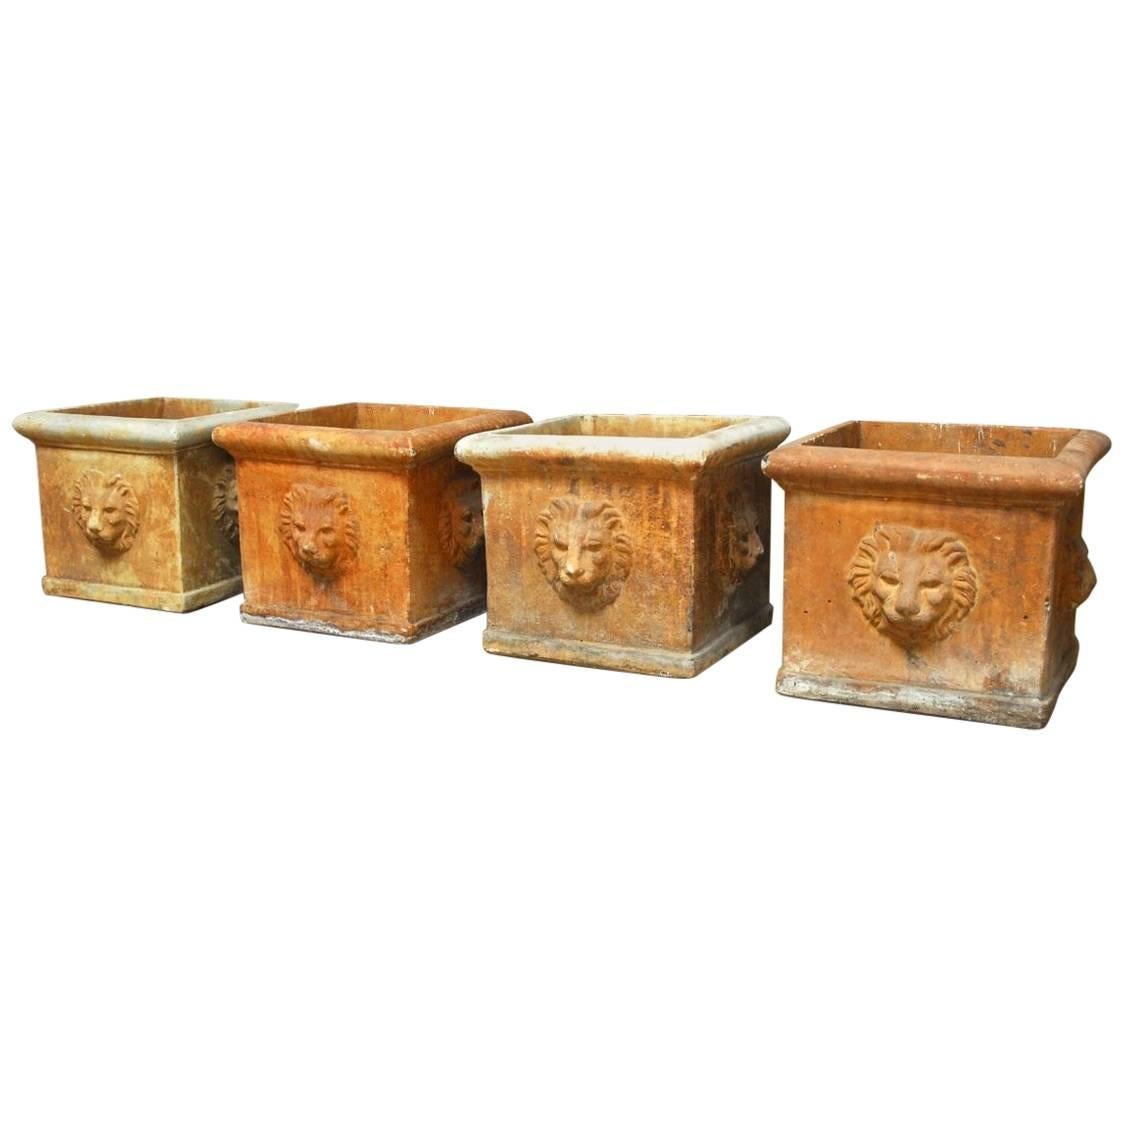 Continental Style Sandstone Planters with Lions Head Motif